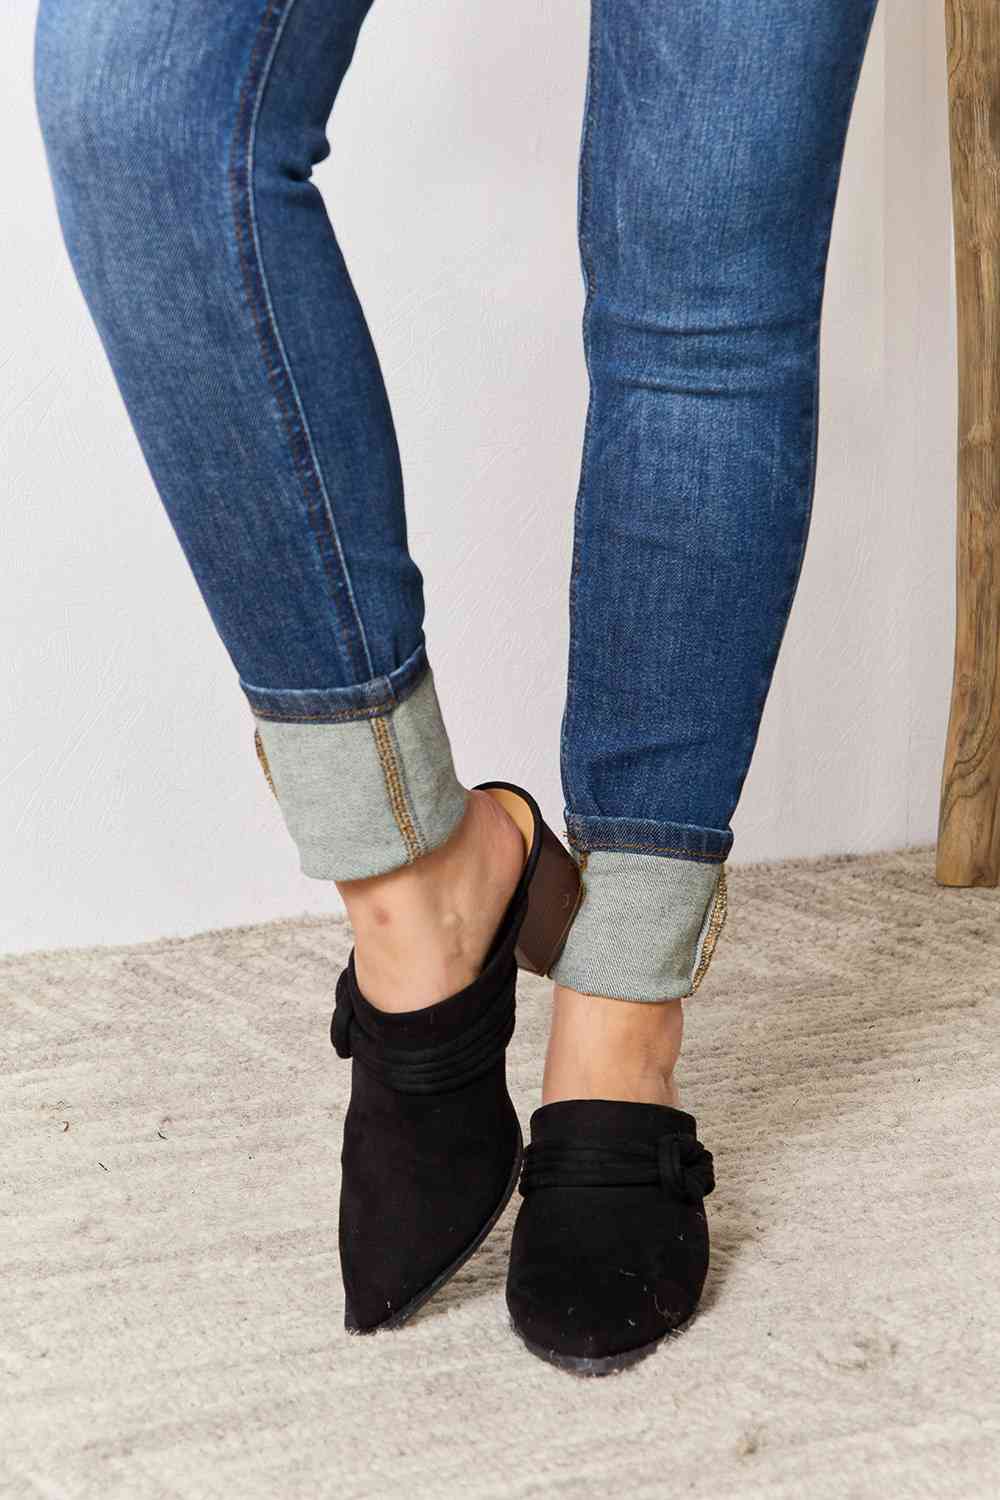 Slide into Fall Braided Mules - Cheeky Chic Boutique